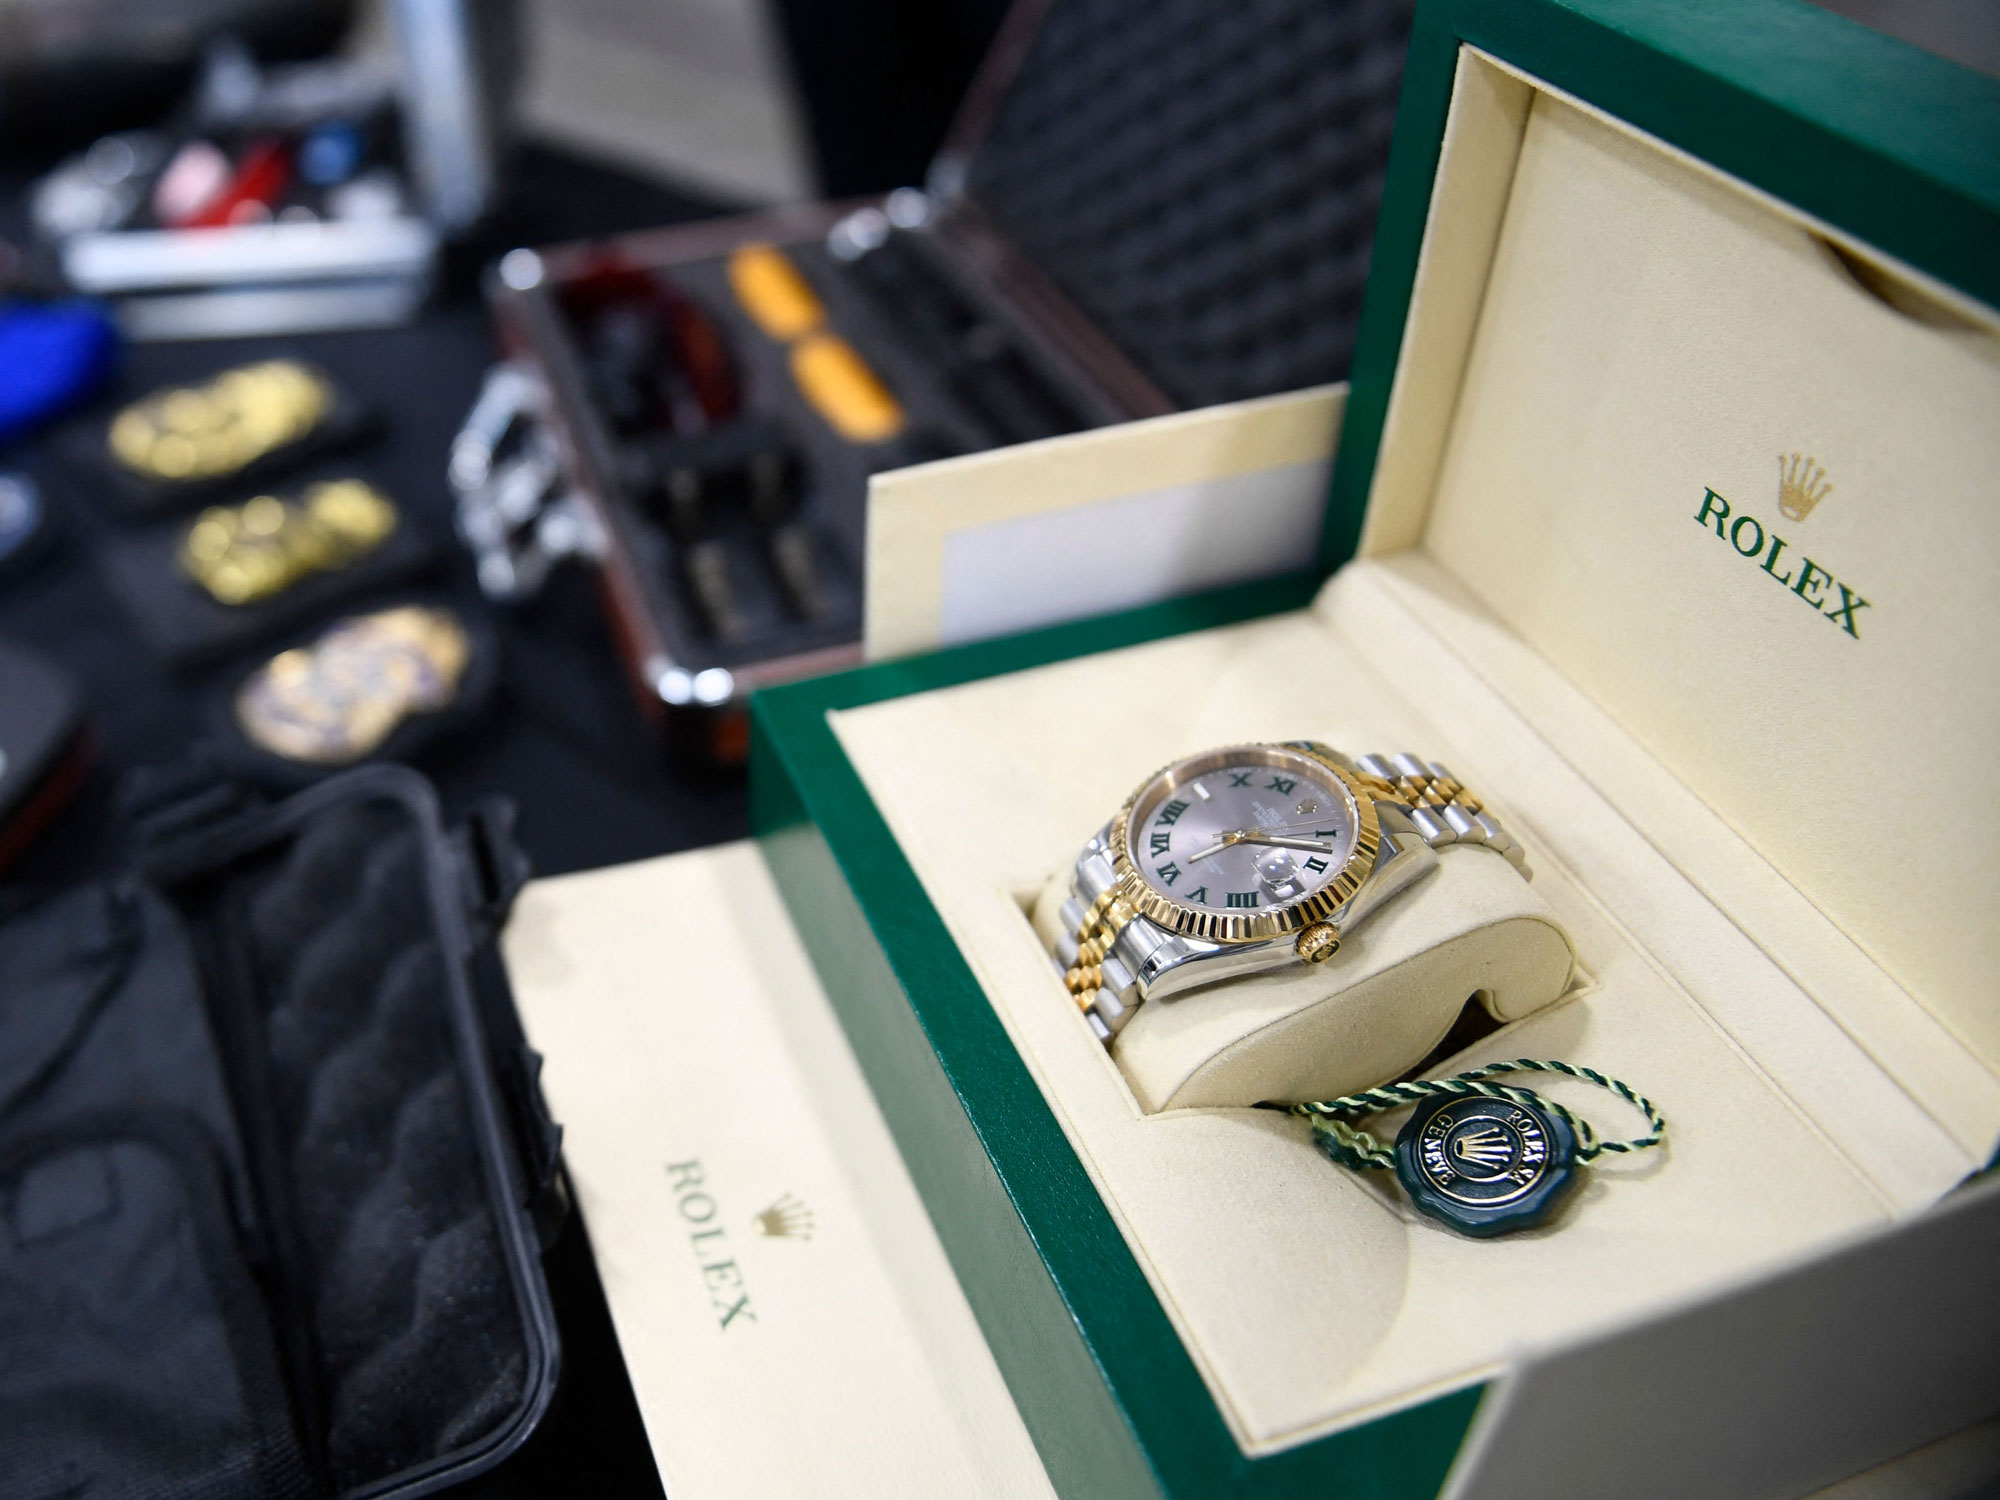 Rolex Replicas Account for Half of Fake Watches, Dealer Says Bloomberg